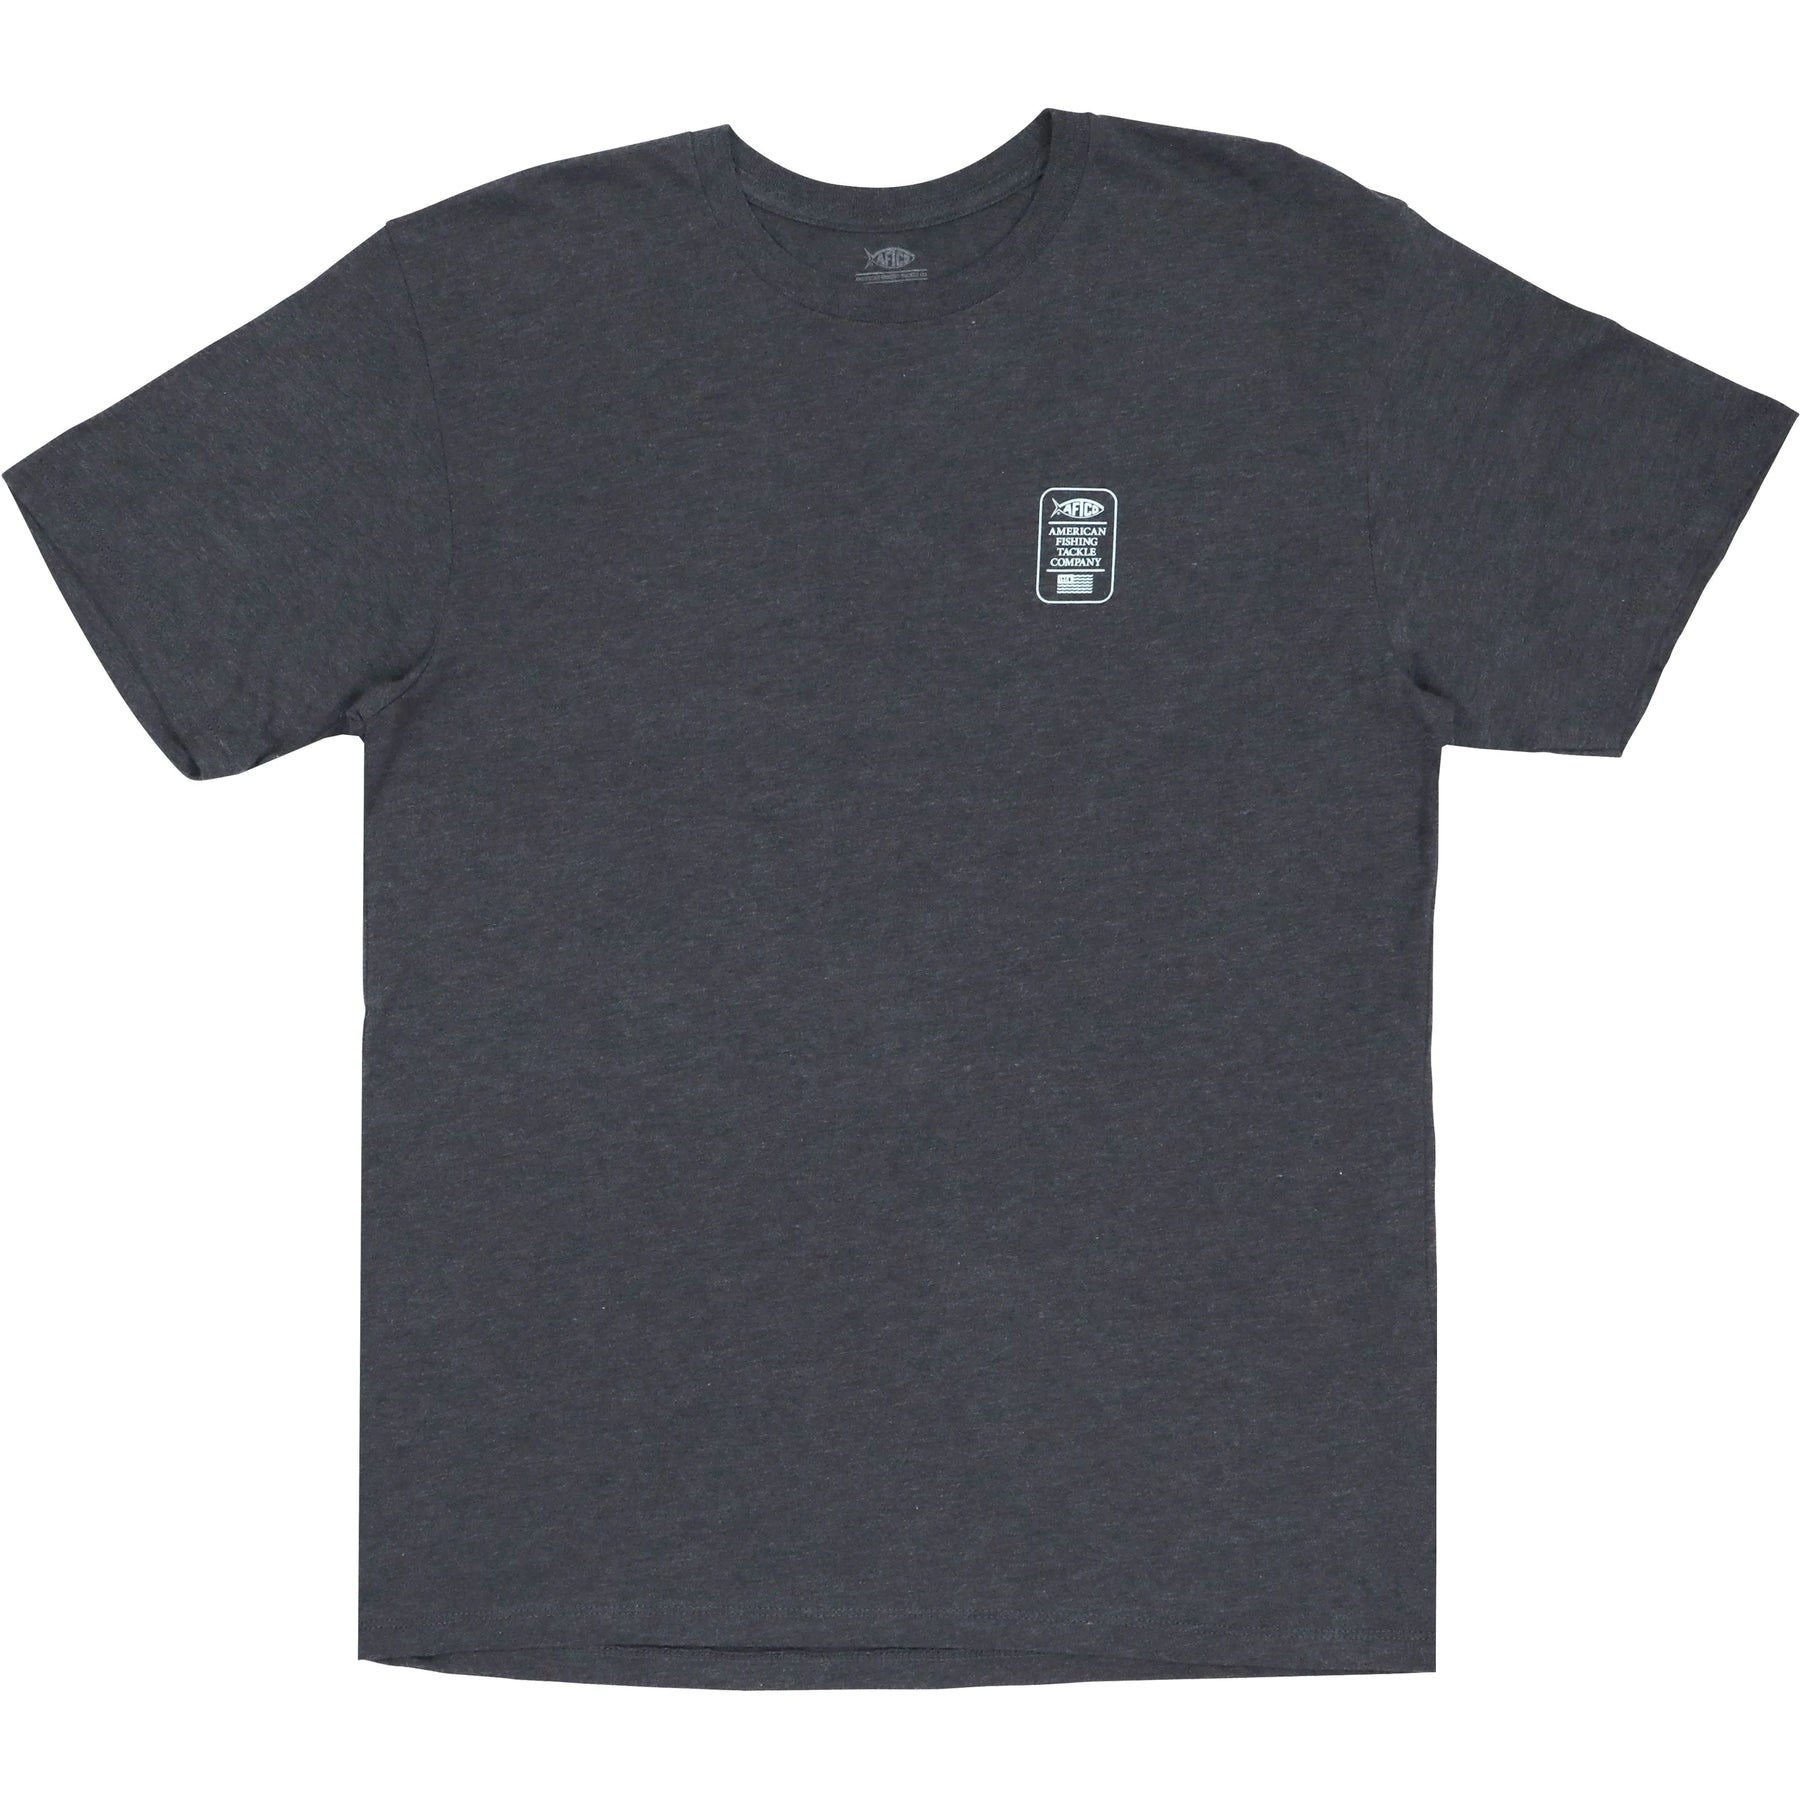 Aftco Rootbeer Short Sleeve Tee Charcoal Heather